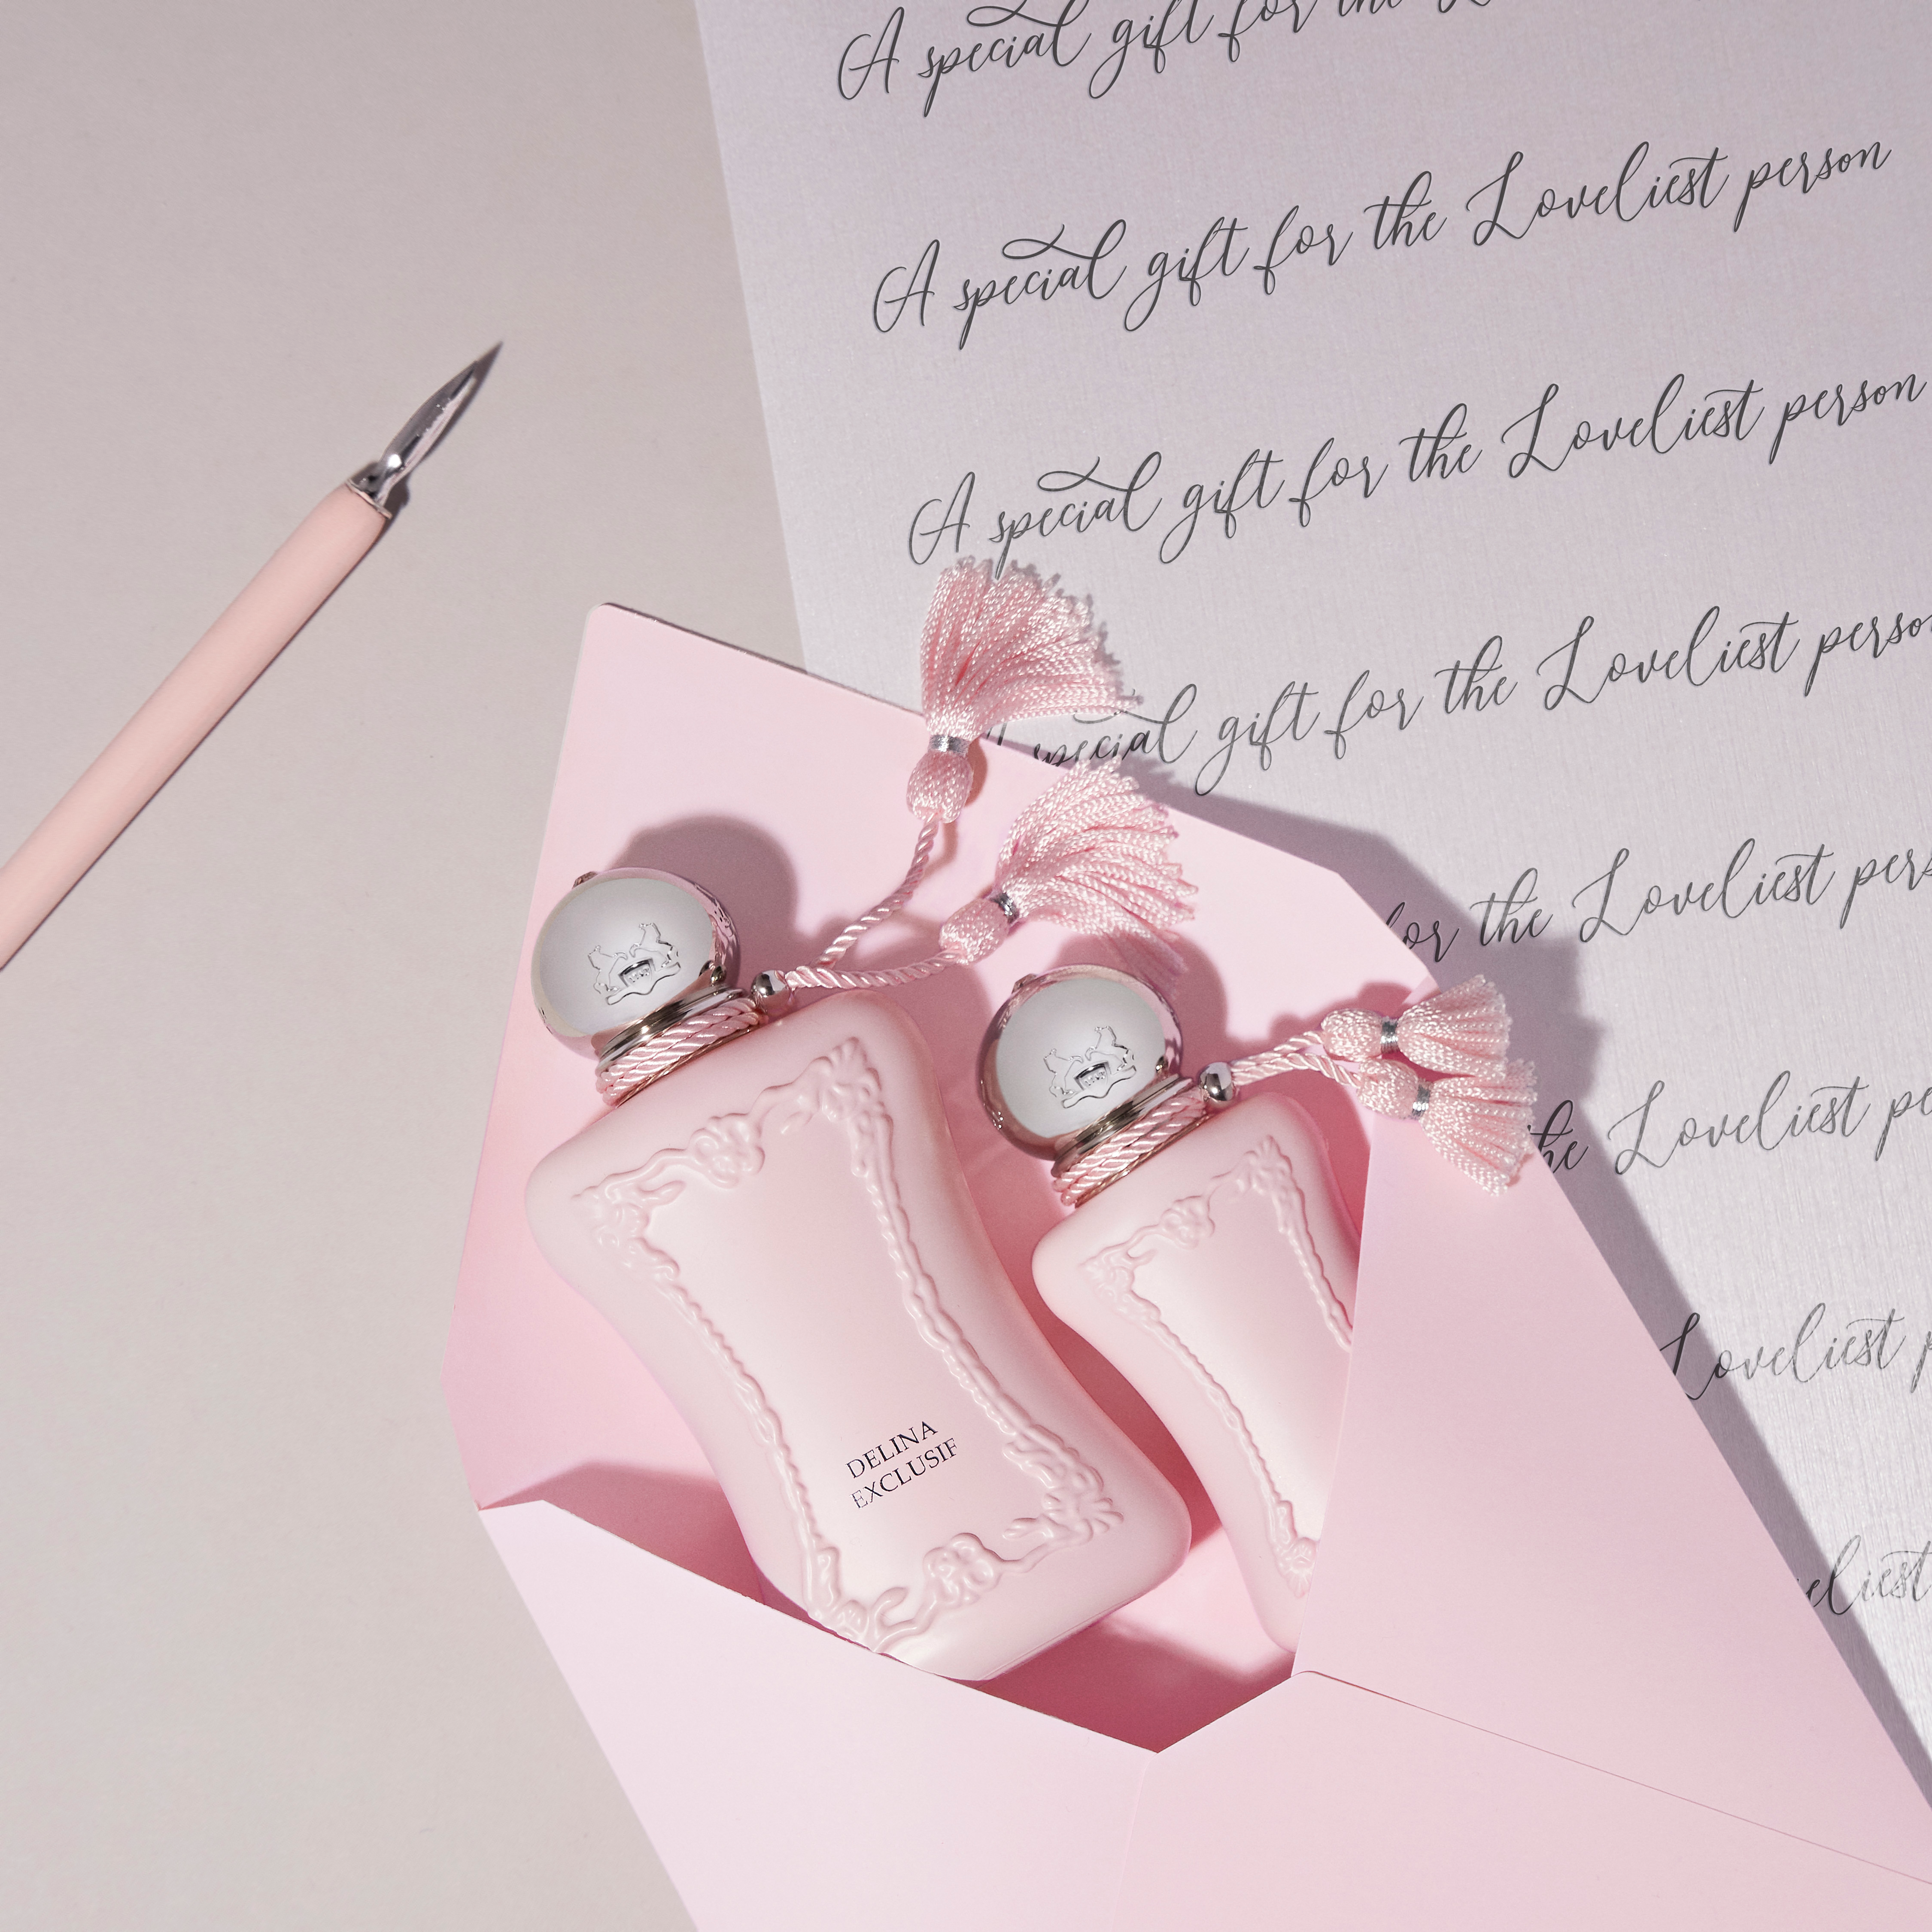 Perfumes and Beauty products Mum Will Adore 